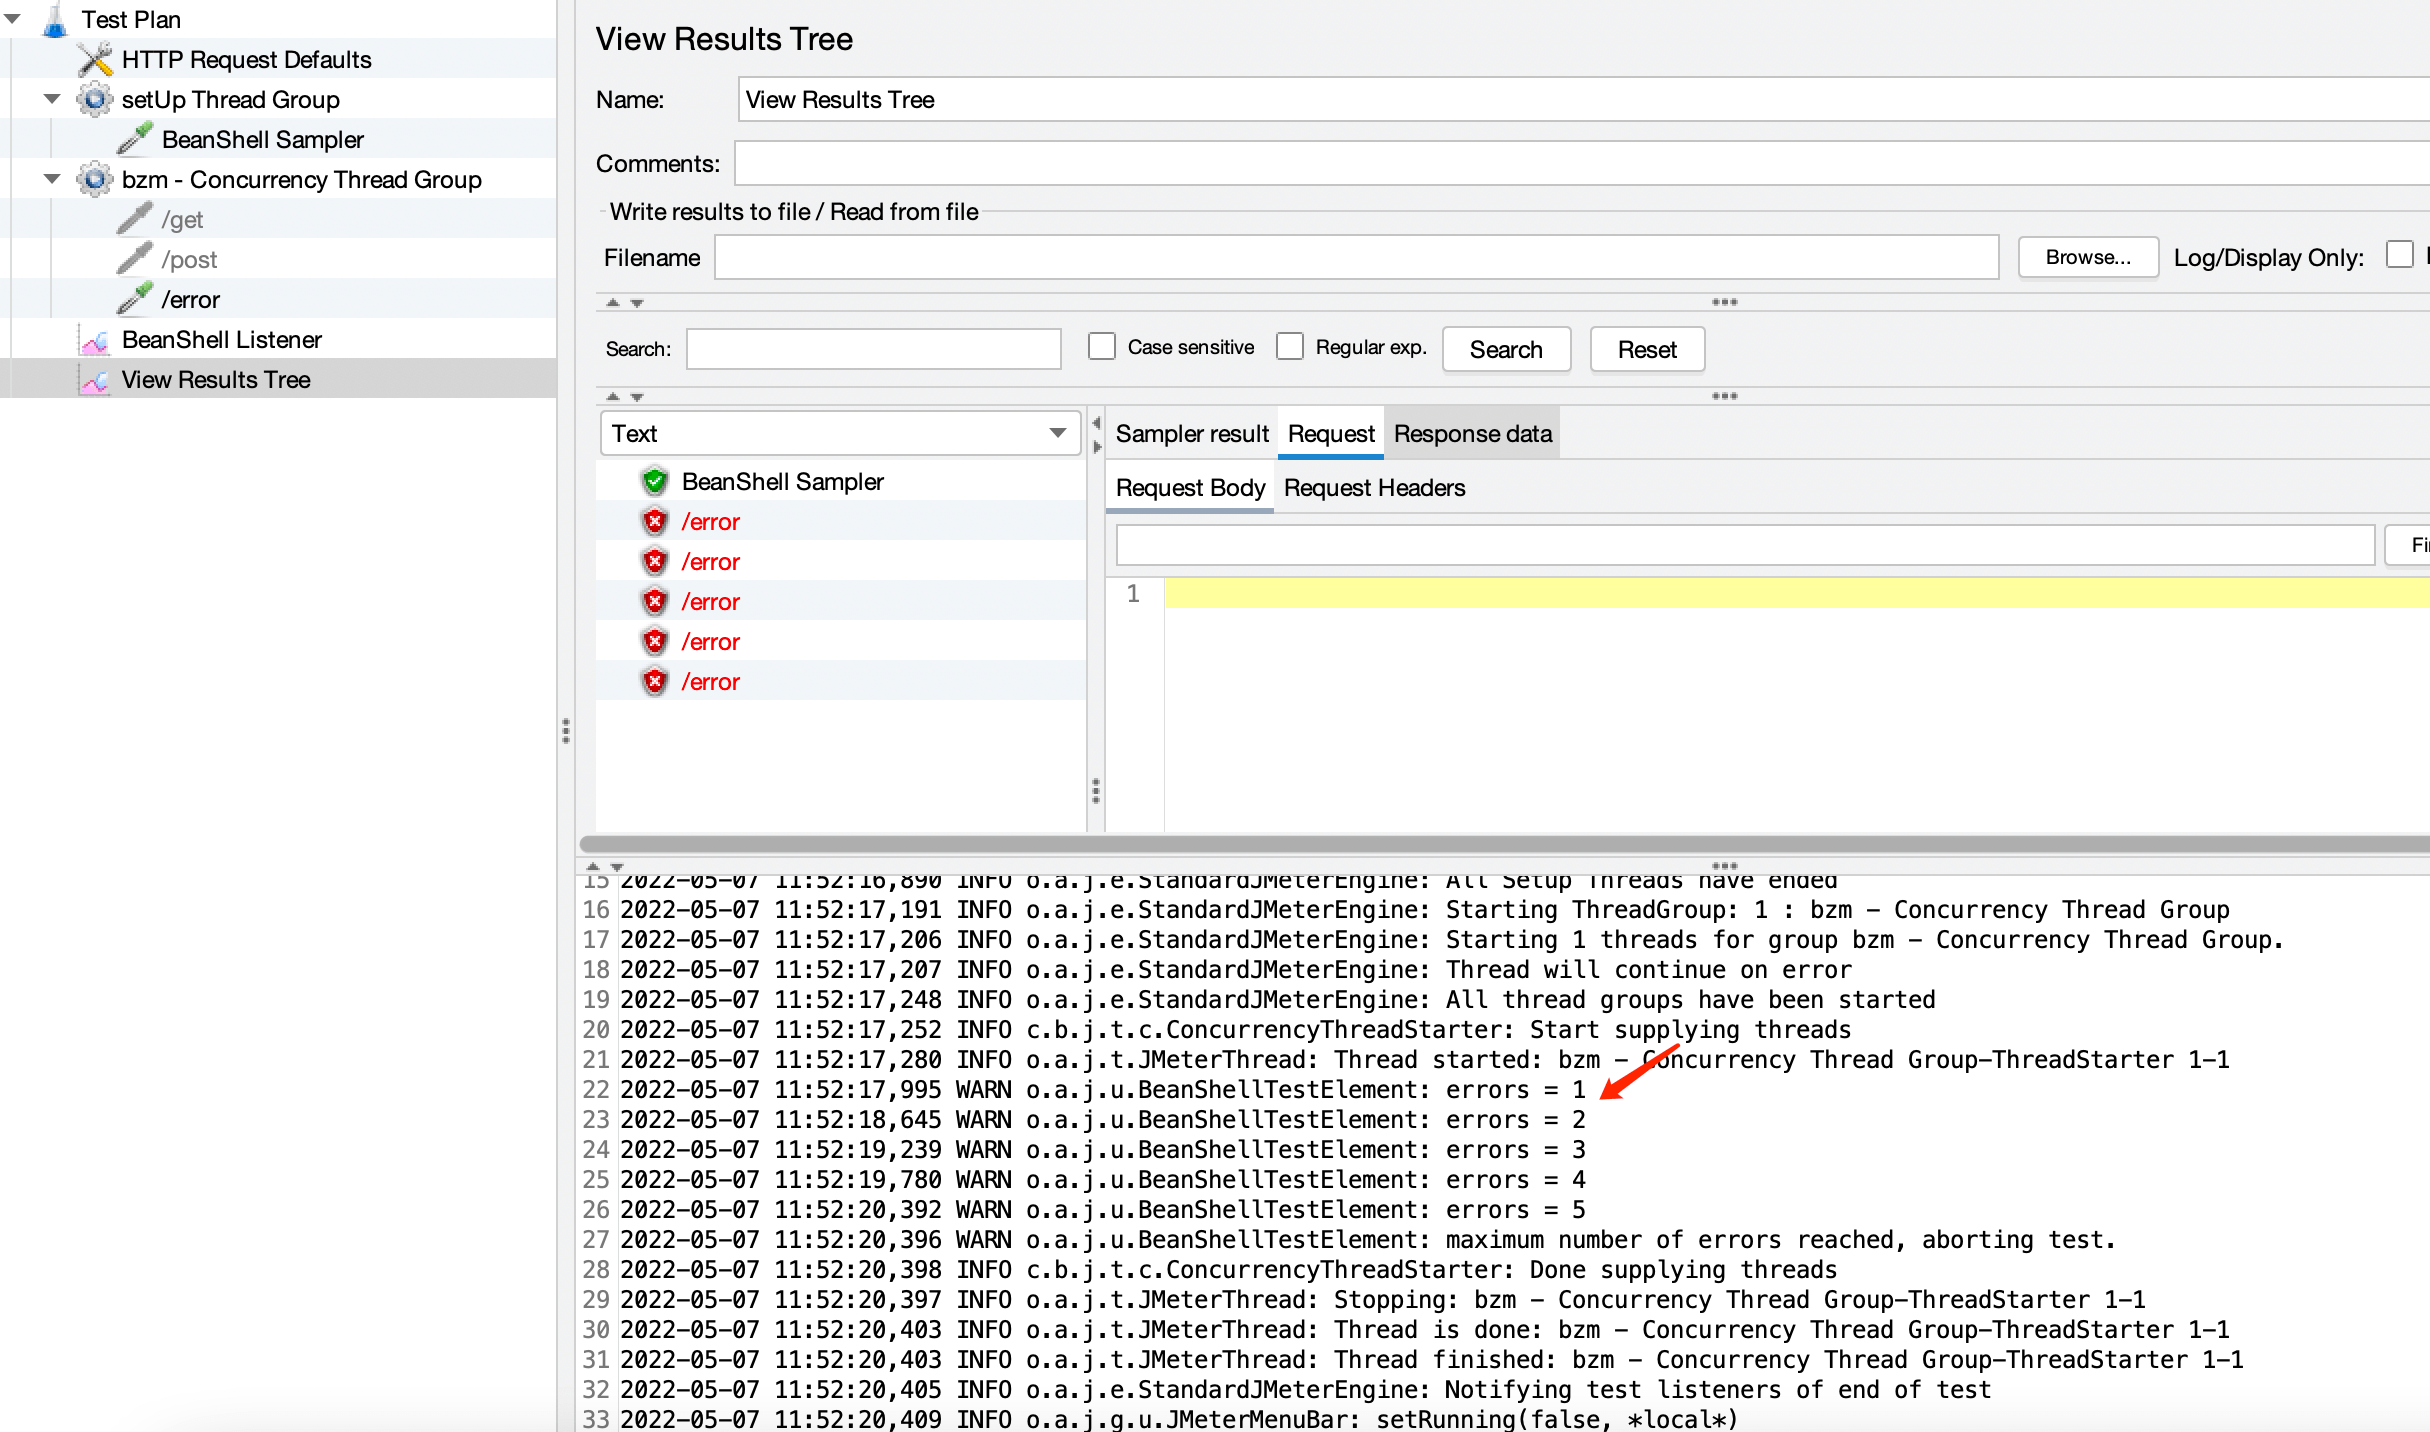 How to stop the test after reaching a given number of errors during stress testing in JMeter